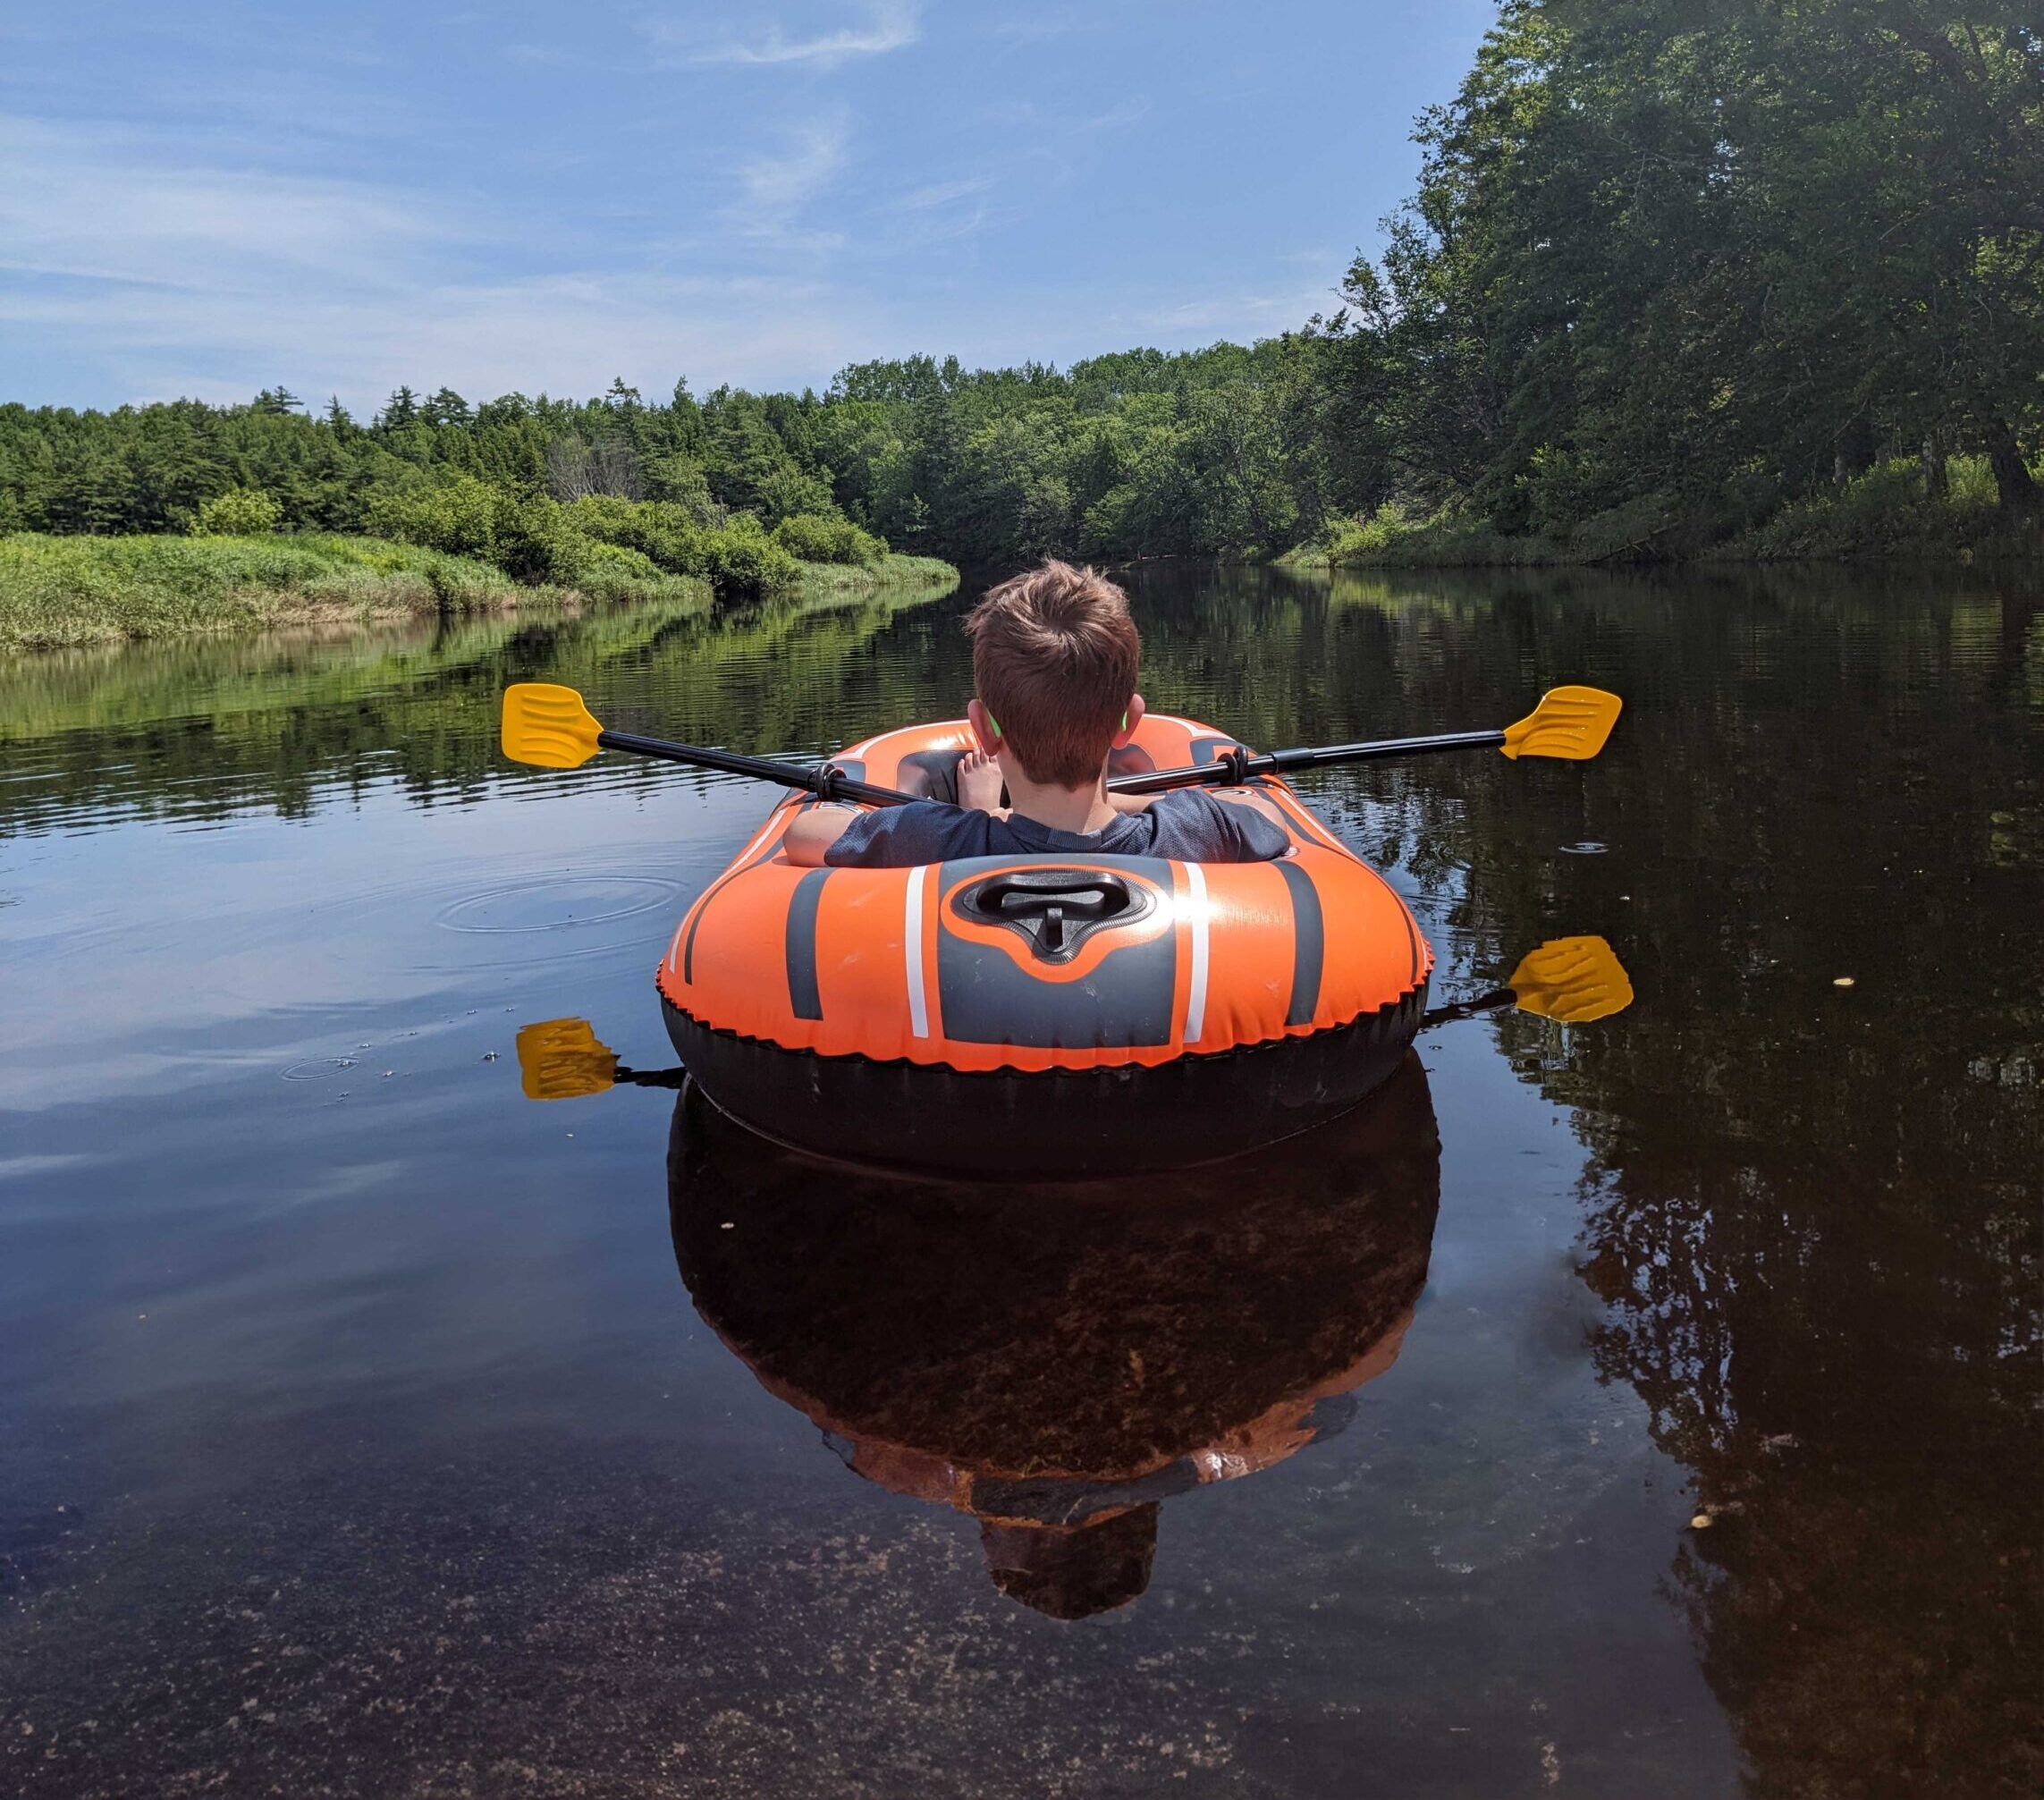 A child in an inflatable boat drifts down a calm river